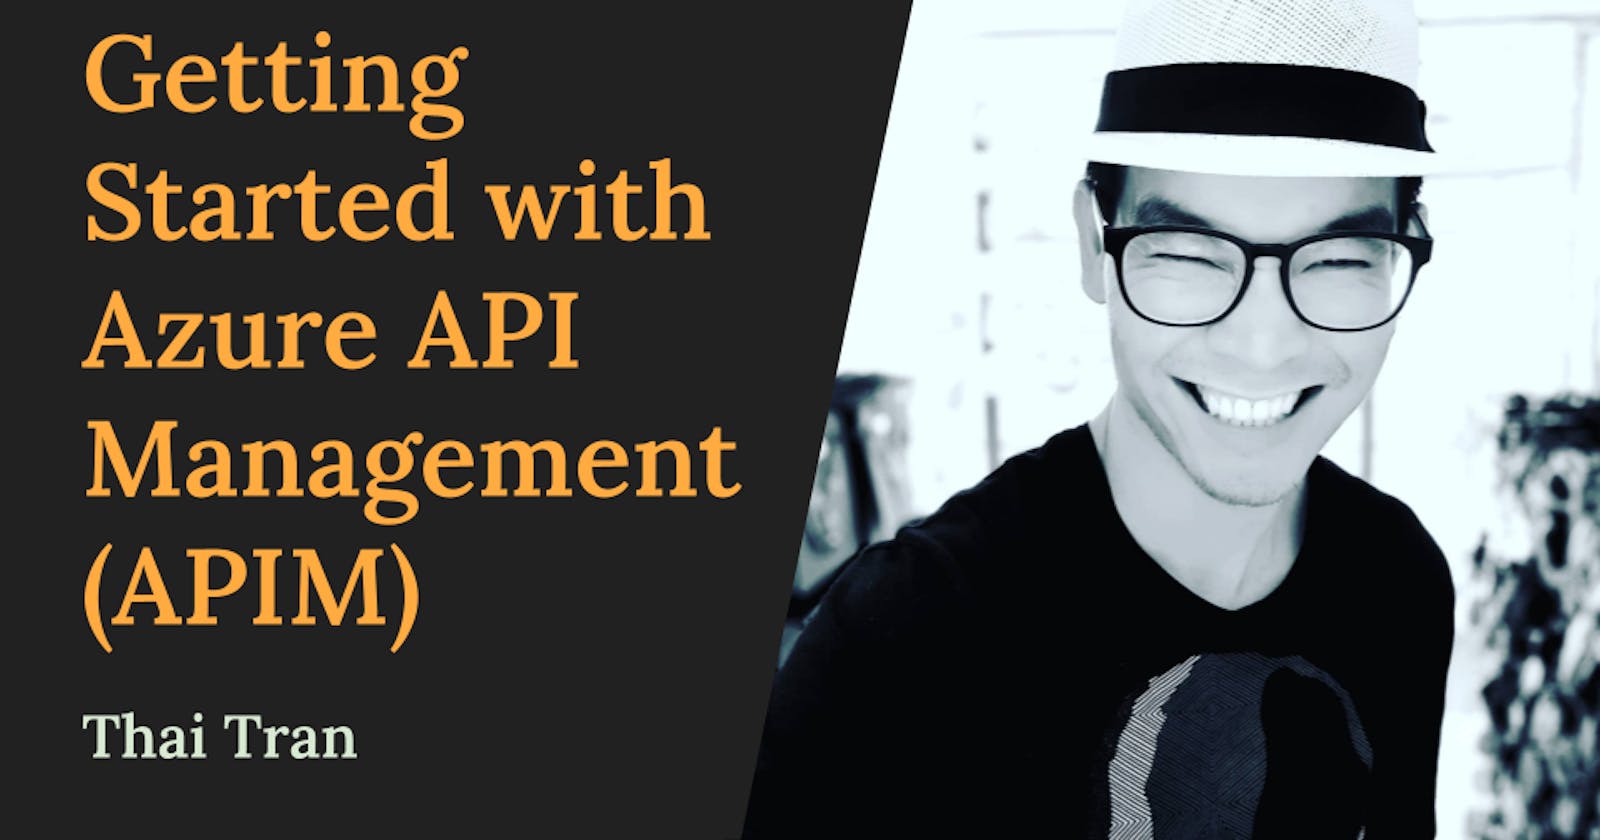 Getting Started with Azure API Management (APIM)